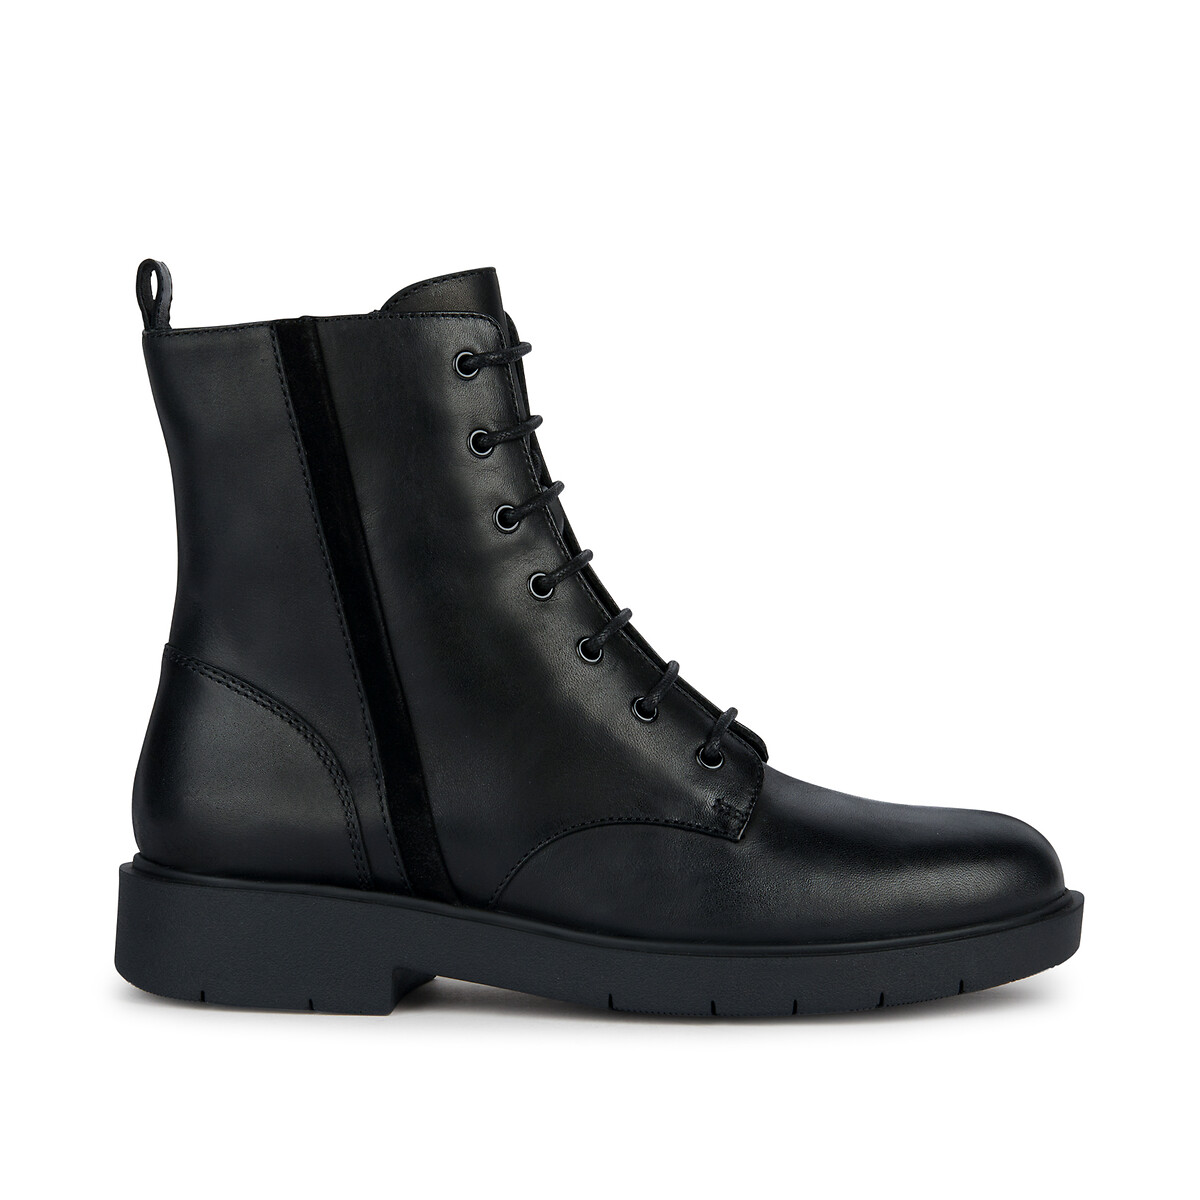 Spherica EC1 Ankle Boots in Leather with Laces